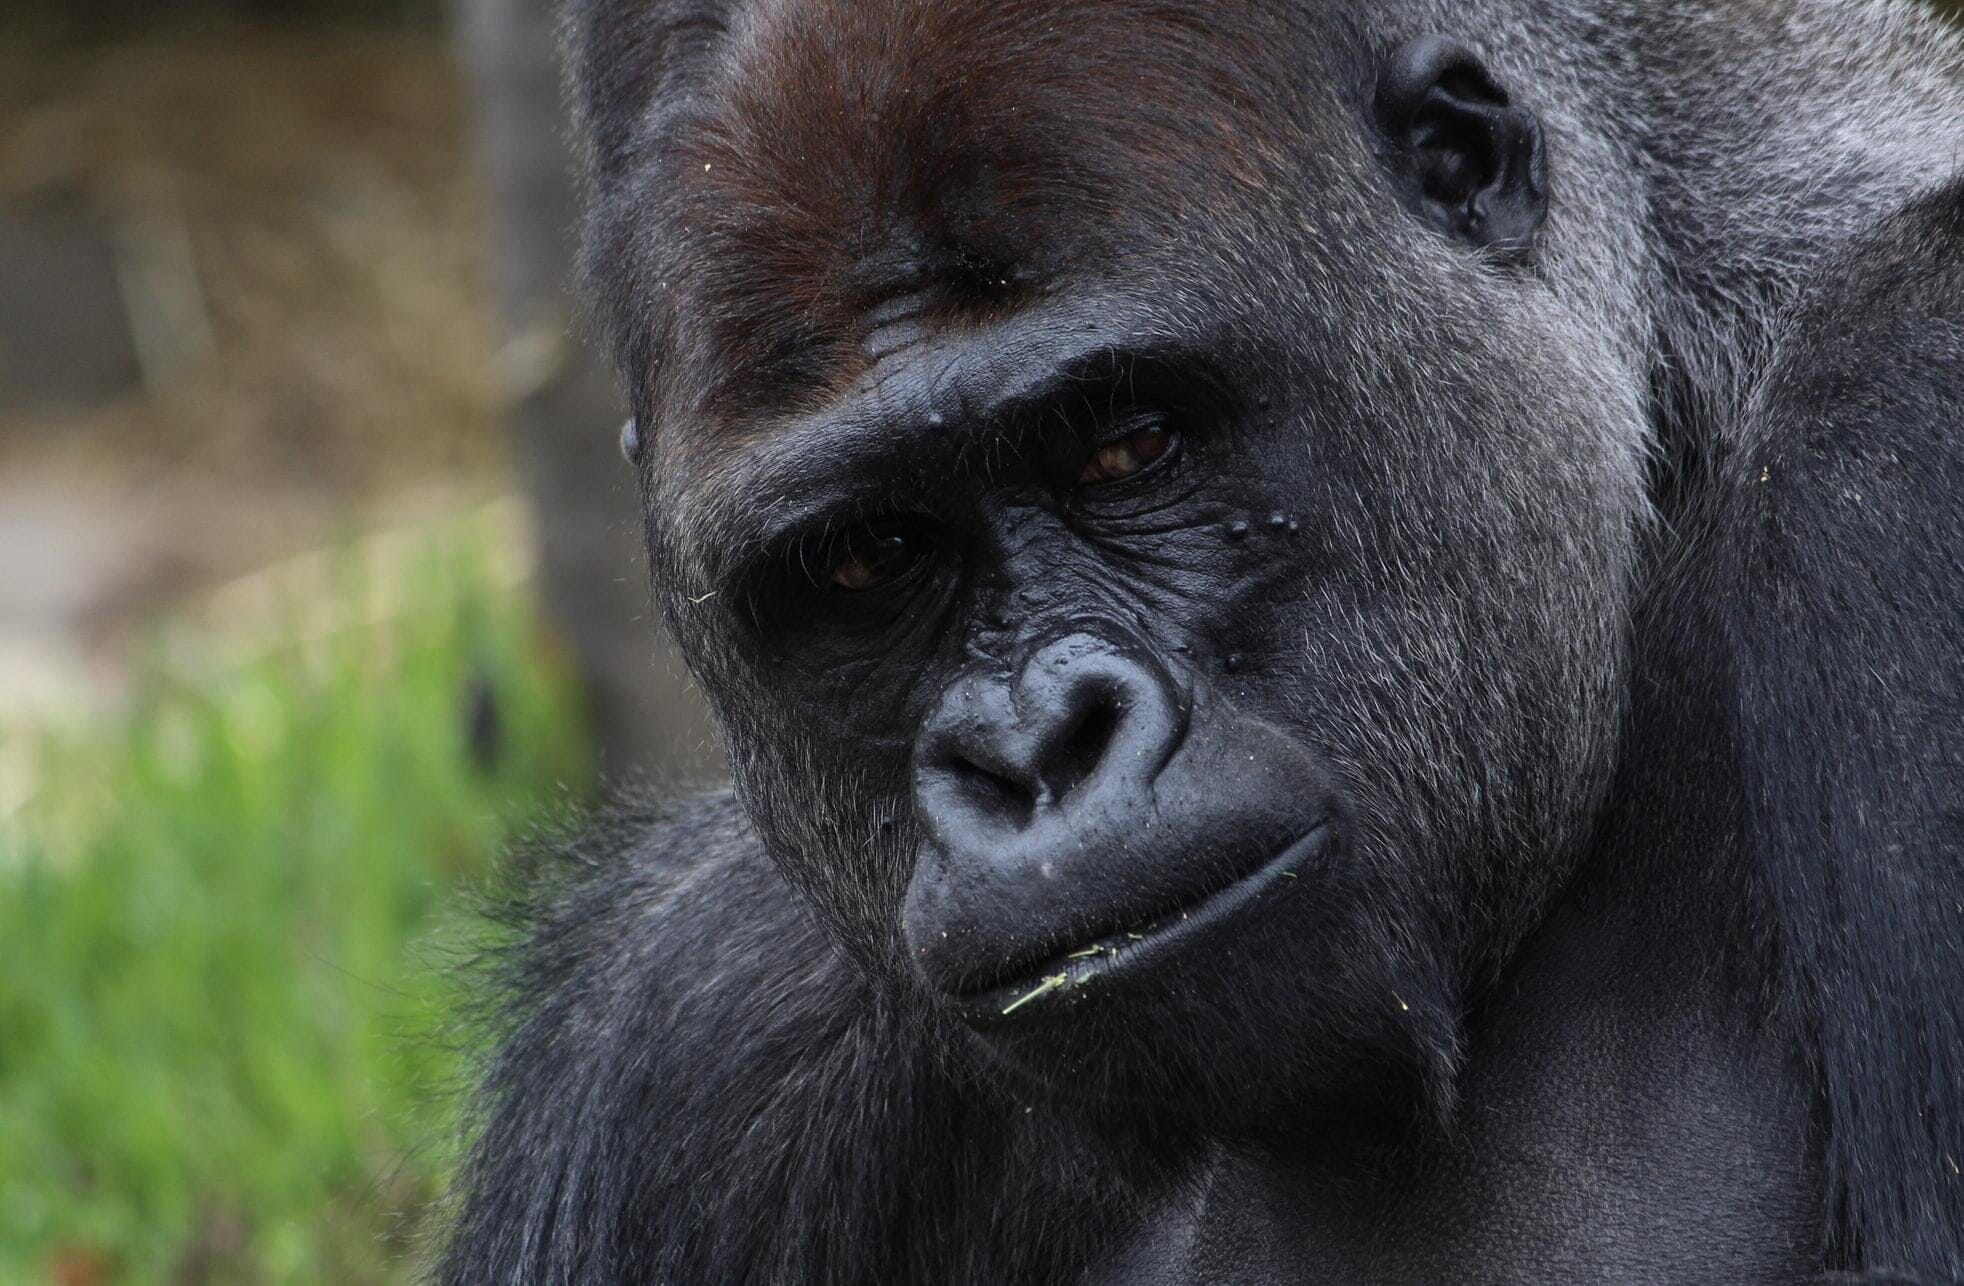 Lessons from Nature: 3 Lessons Learned From the African Mountain Gorilla